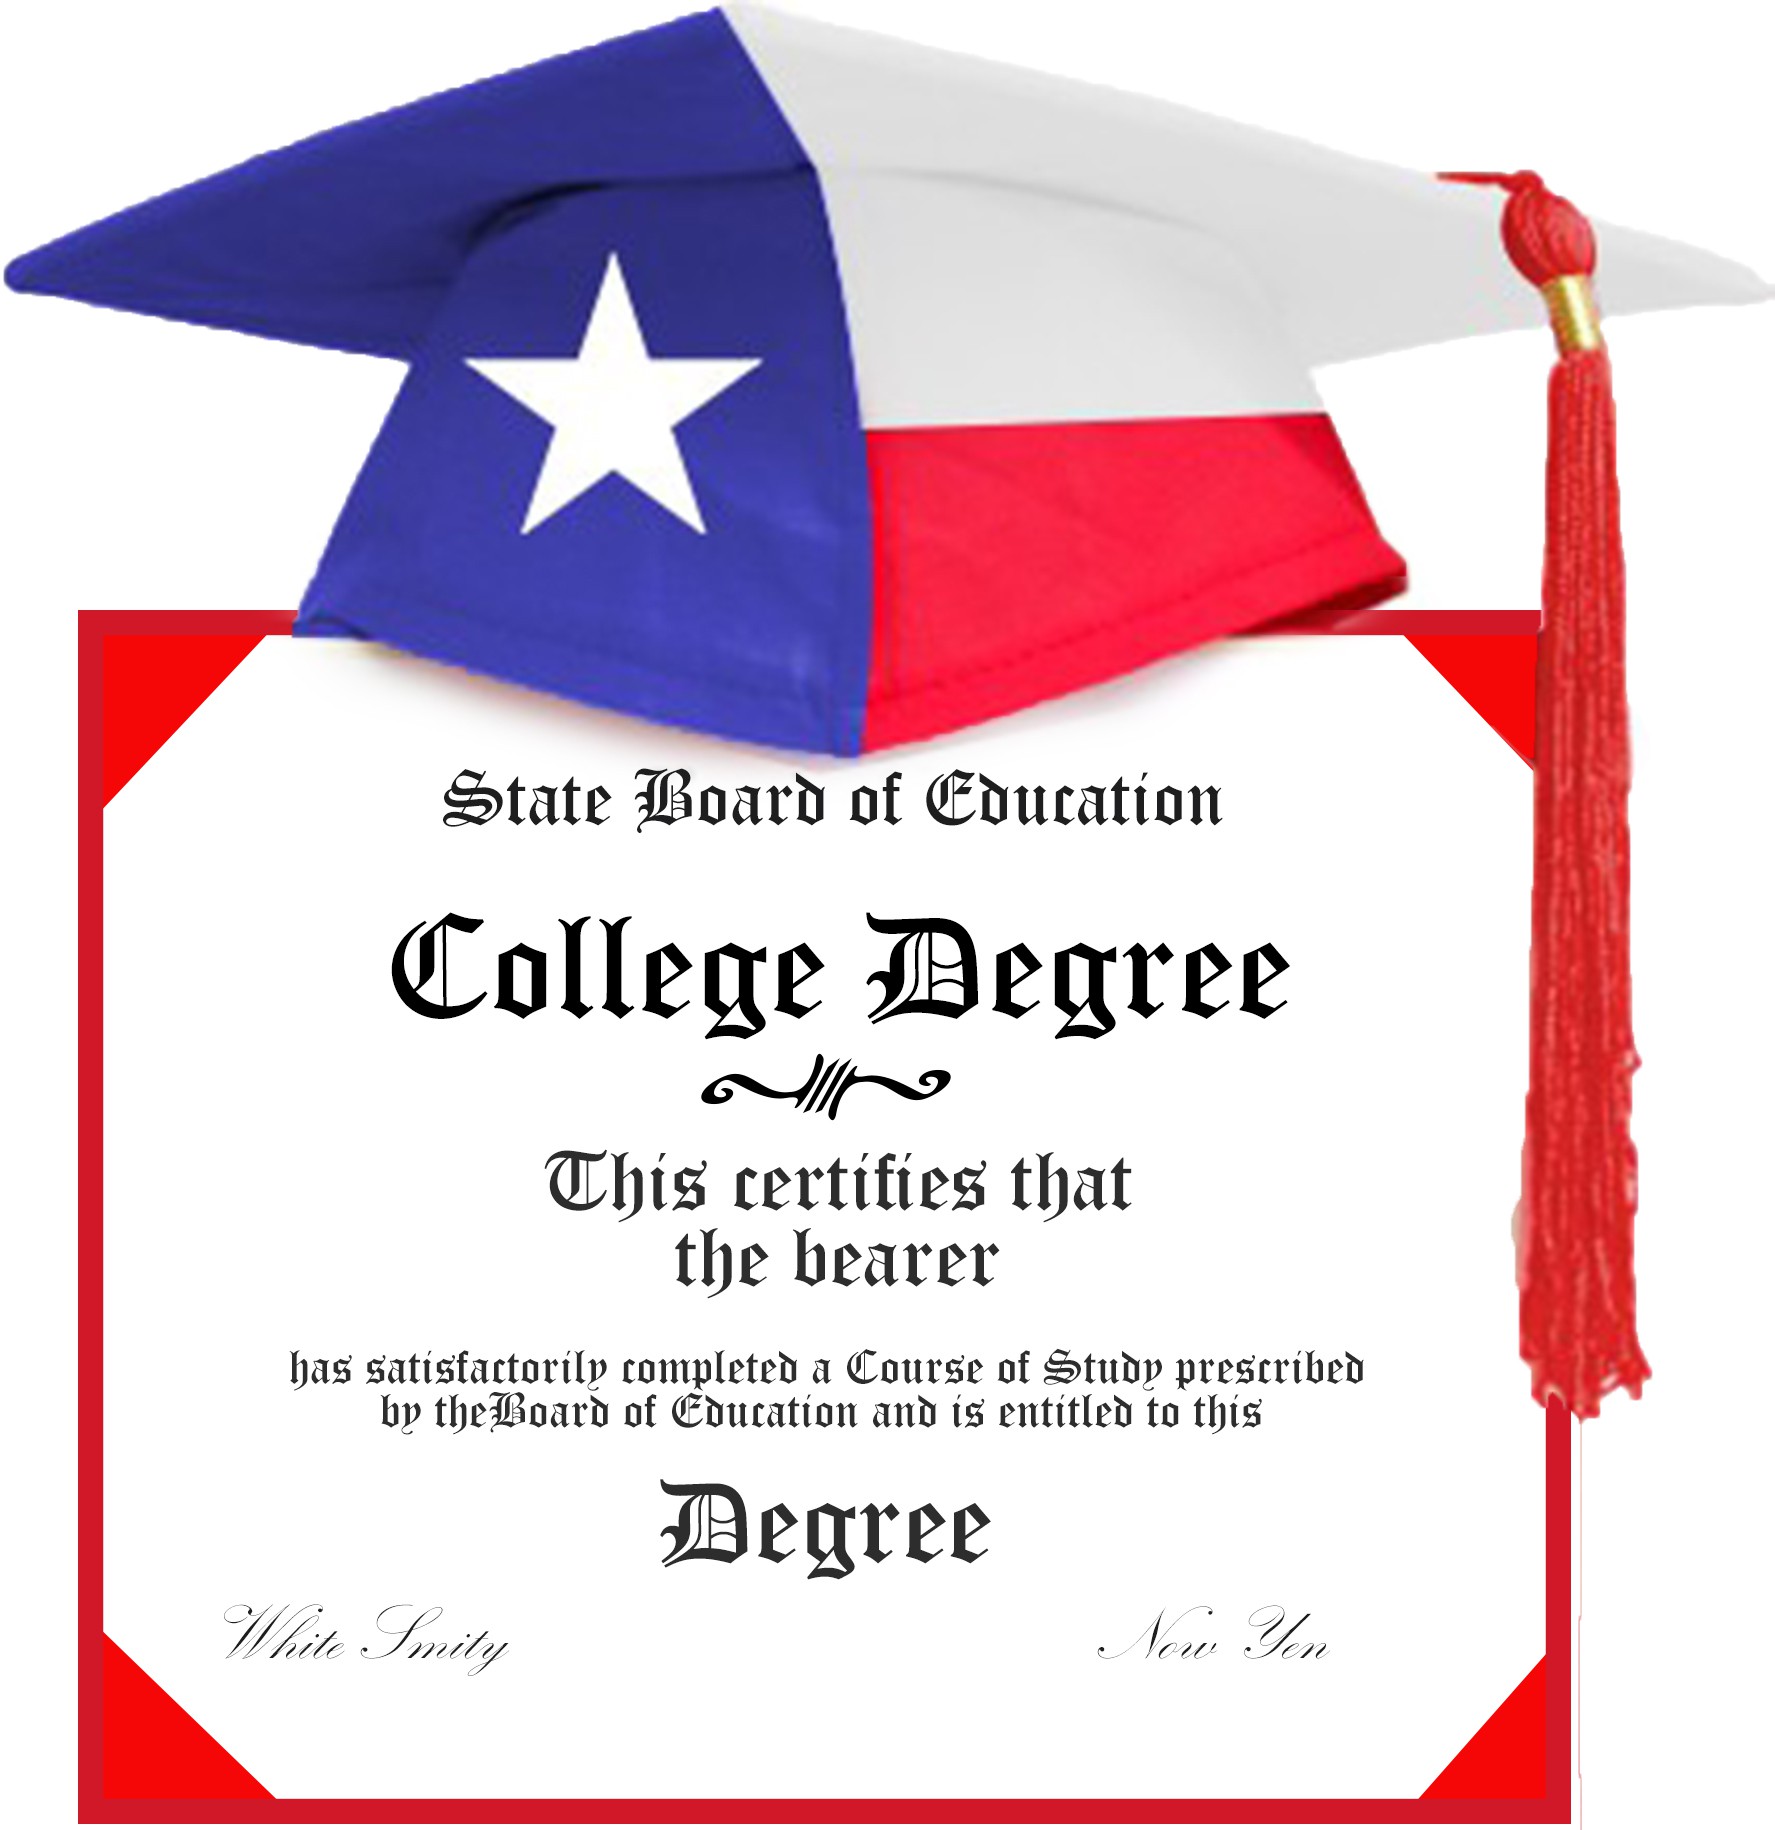 The University of Texas of the Permian Basin College Degree